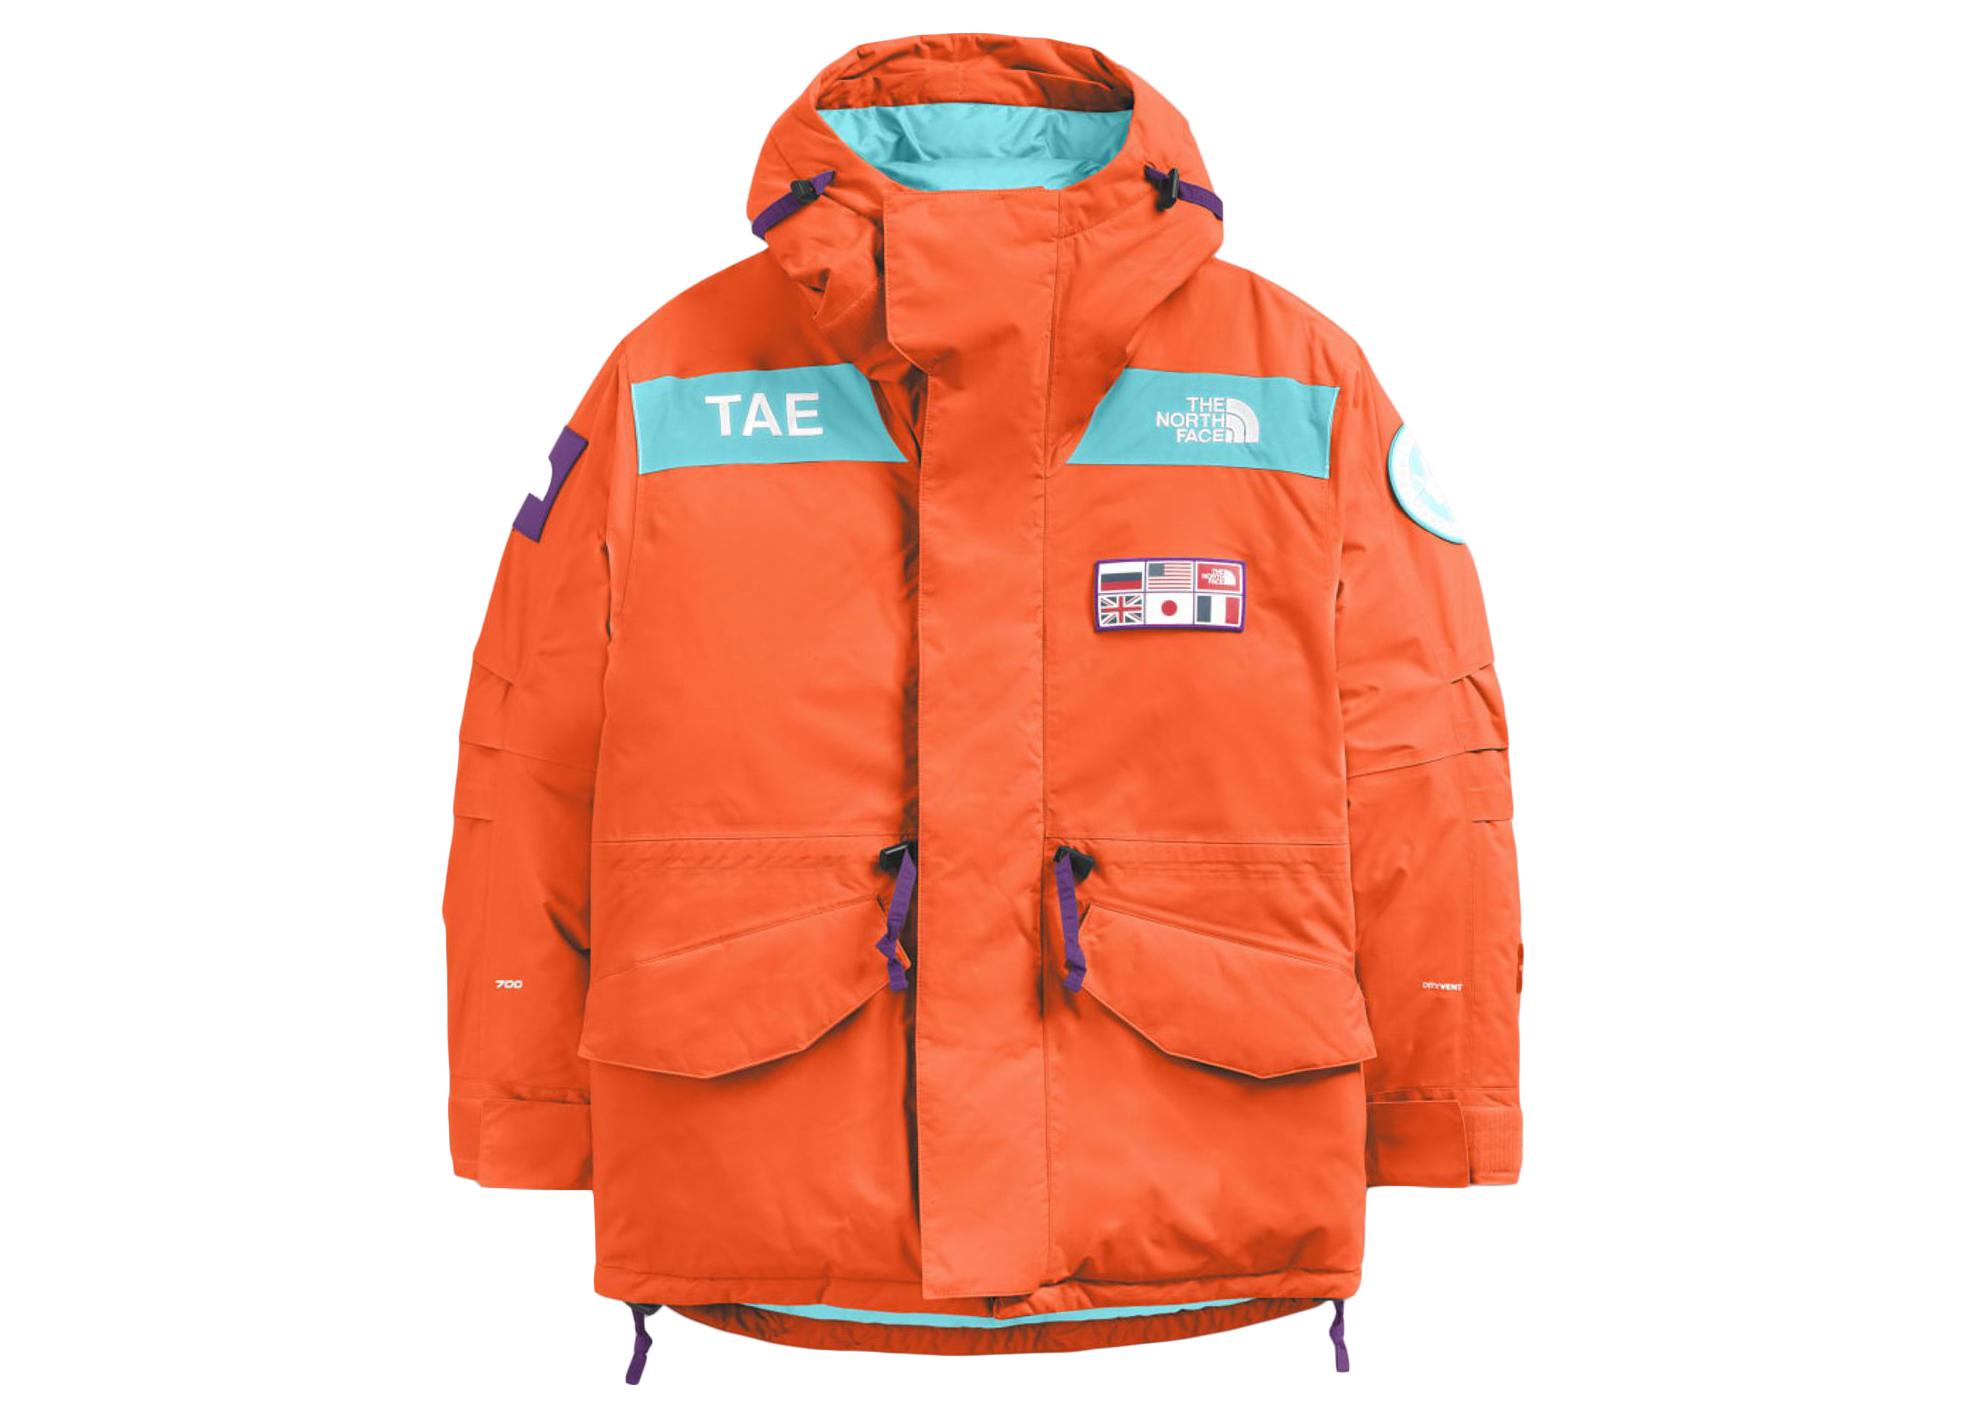 The North Face TAE Trans-Antarctica Expedition 700-Down Parka Jacket Orange